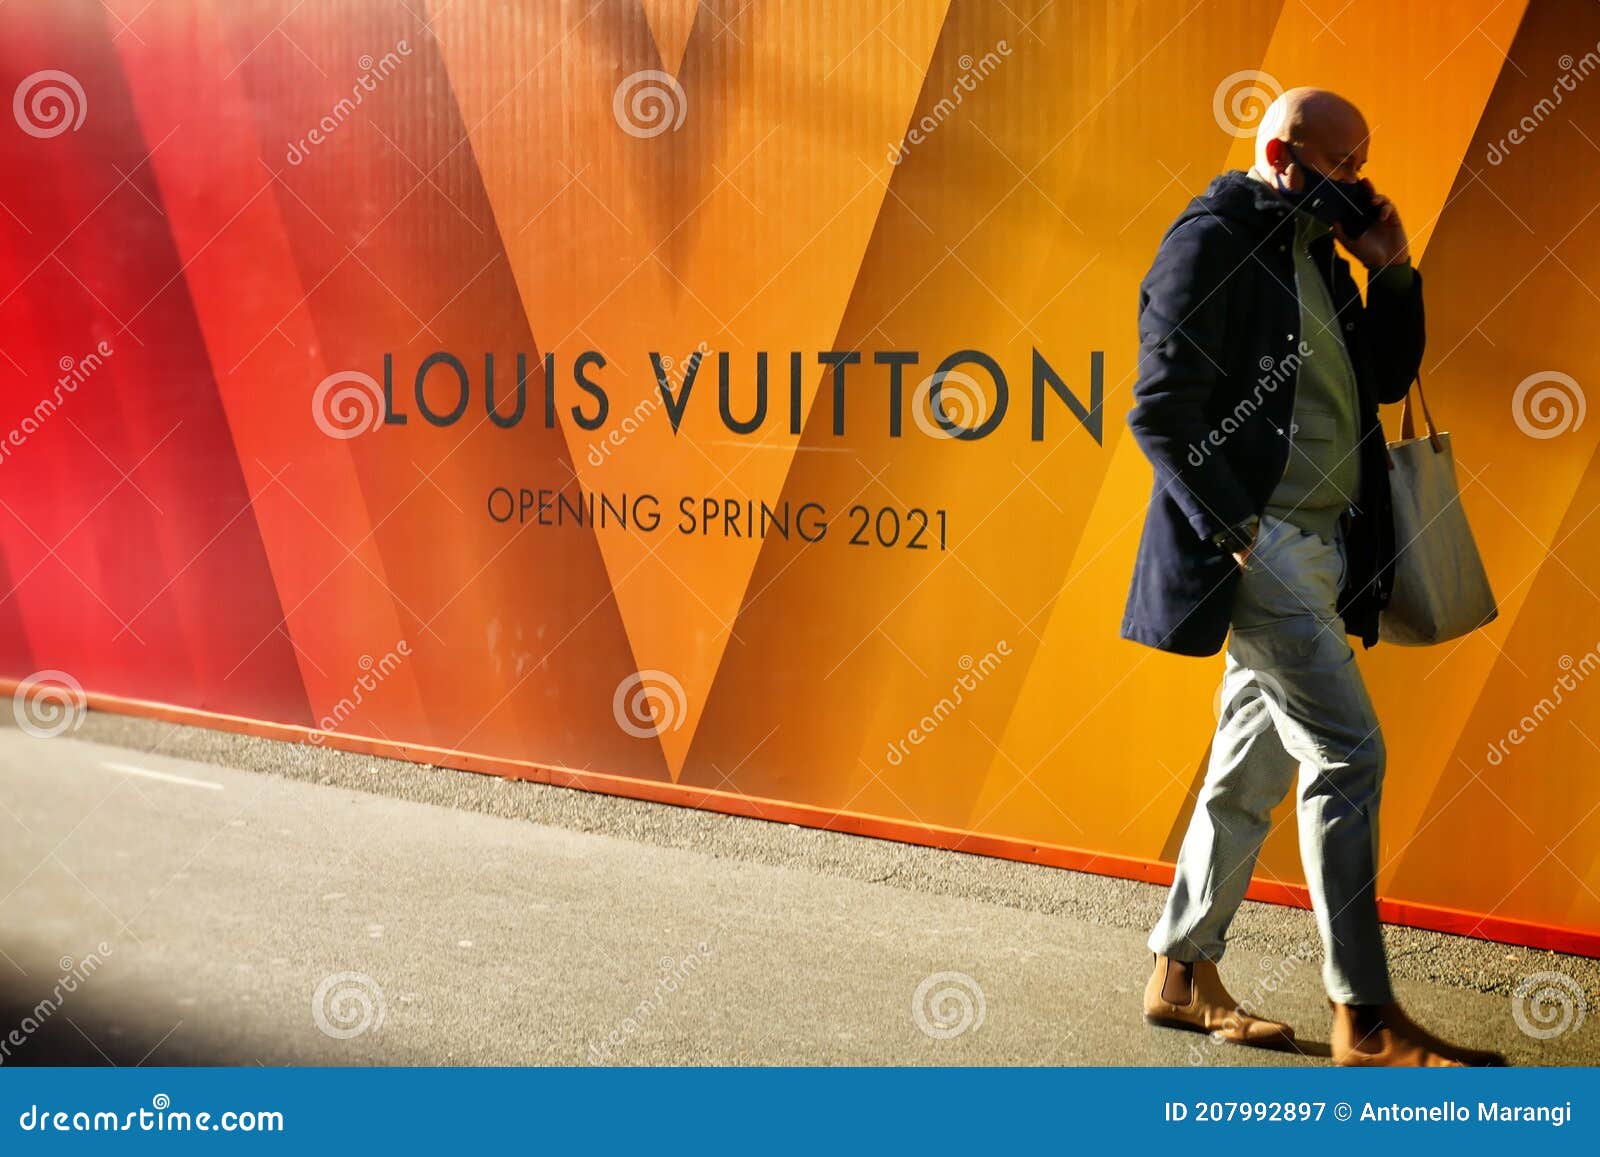 Airplane Flying Over Advertising Billboard with Louis Vuitton Logo.  Editorial 3D Rendering Editorial Photo - Image of popular, advertising:  90108546